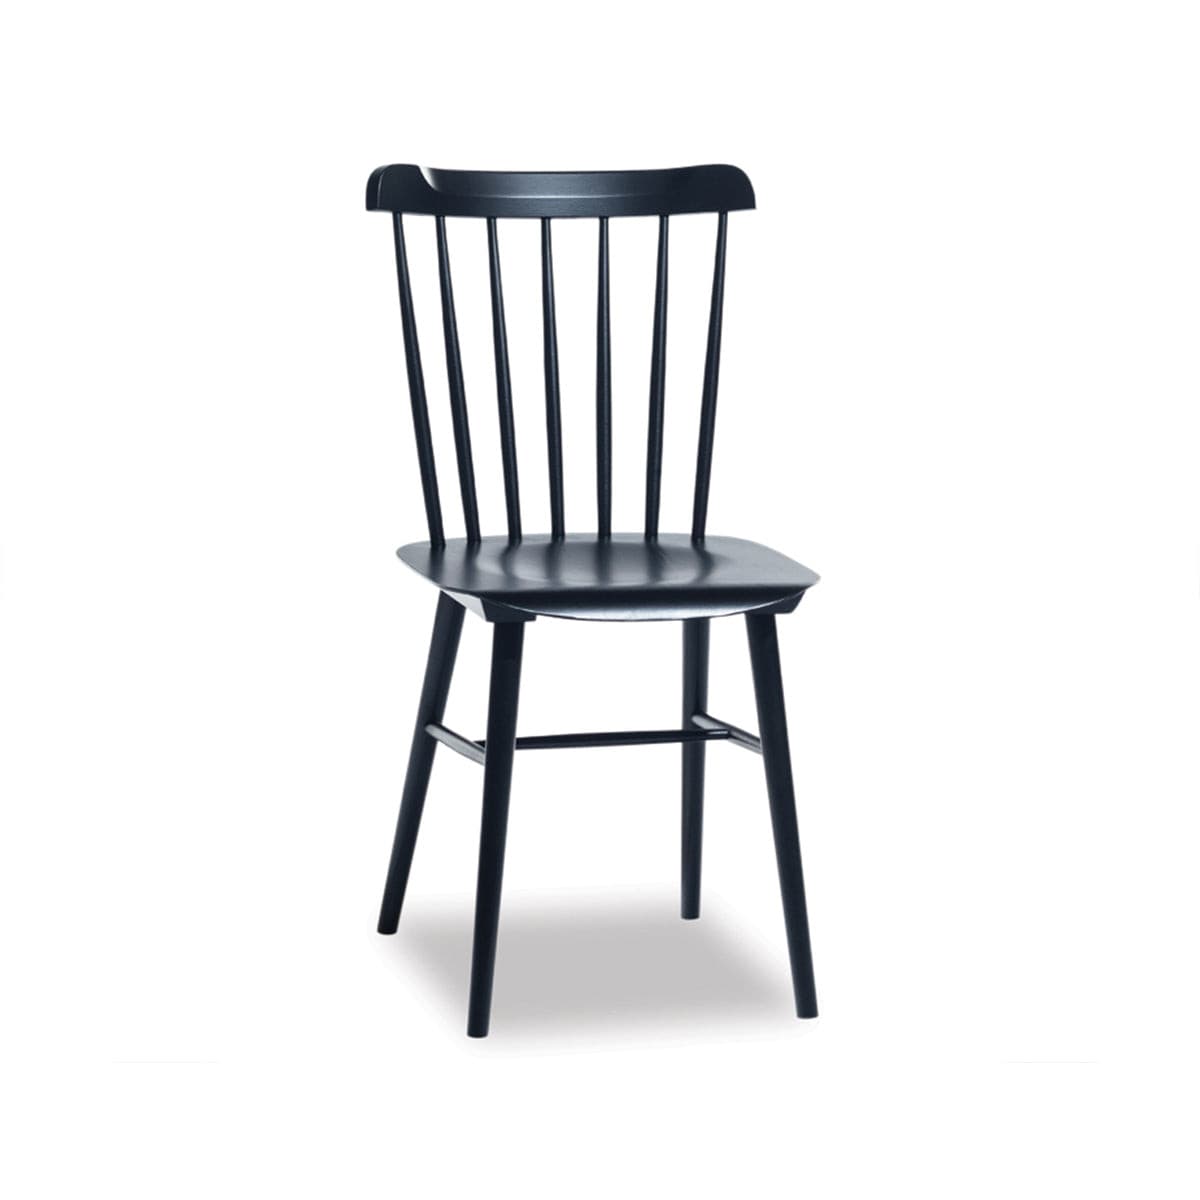 Ironica Dining Chair (Black).